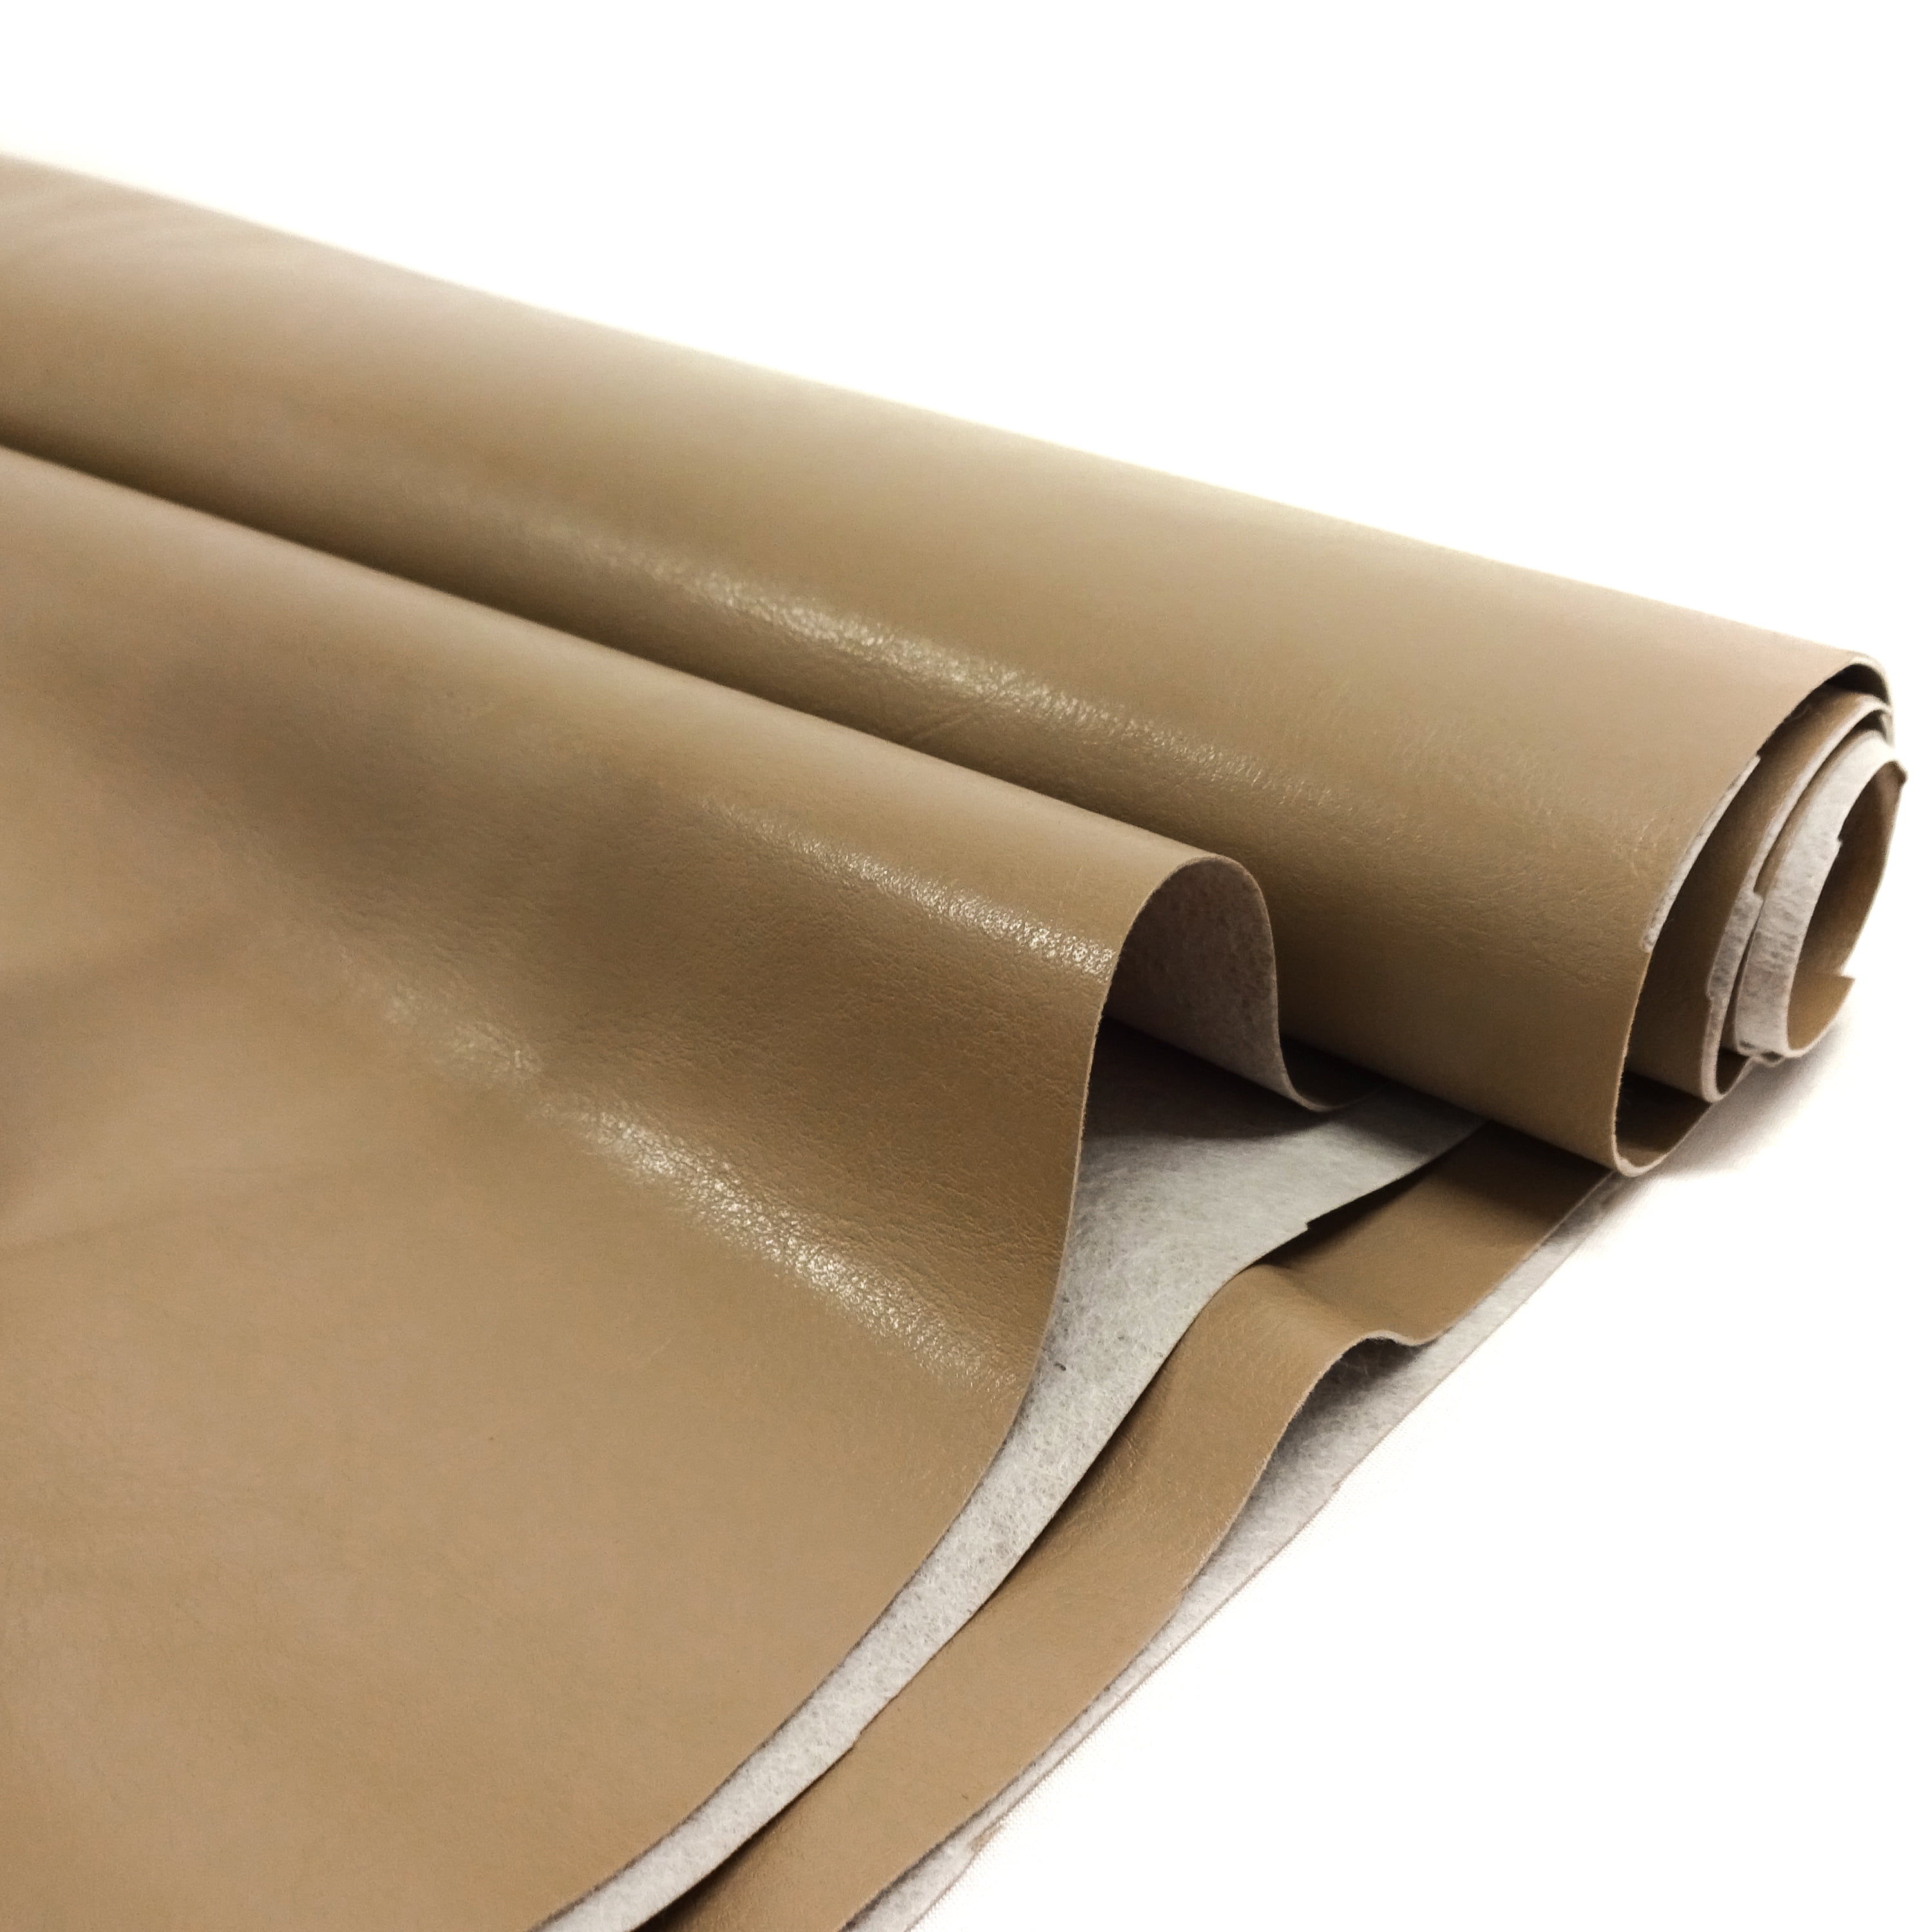 Discount Fabric FAUX LEATHER VINYL Taupe Upholstery & Automotive – In-Weave  Fabric